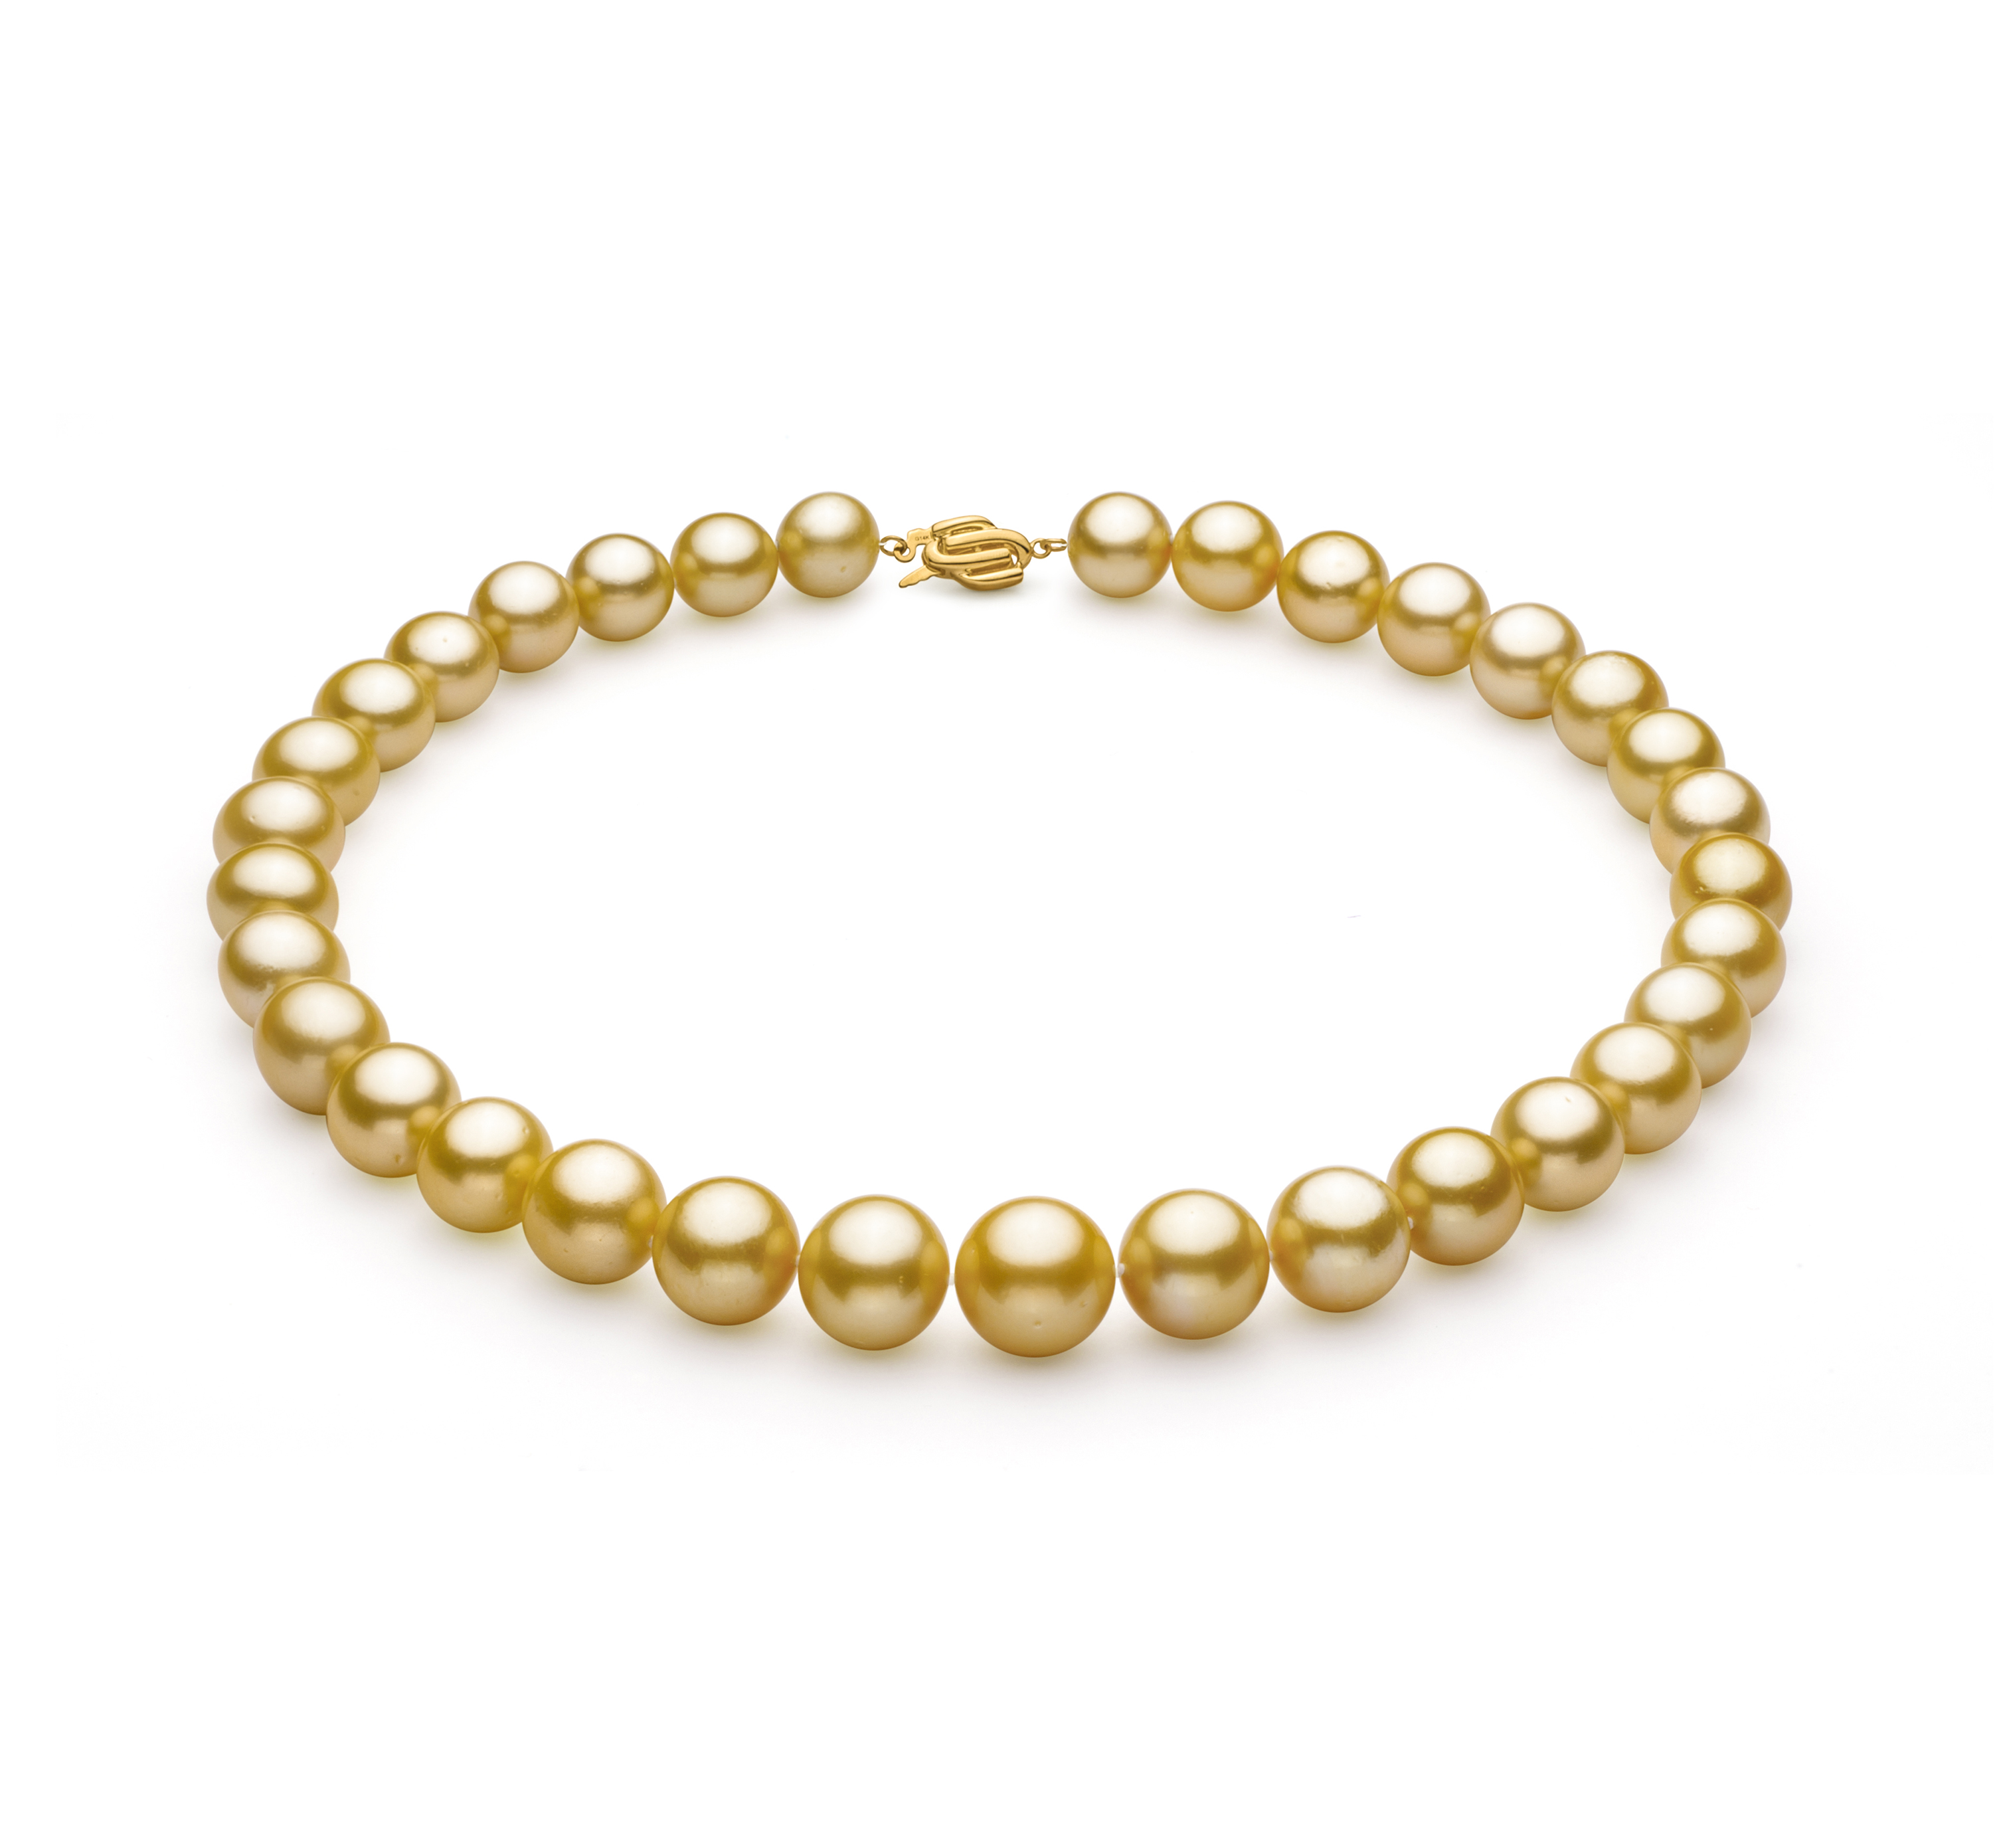 Gold 11.53-15.2mm AAA+ Quality South Sea 14K Yellow Gold Cultured Pearl Necklace